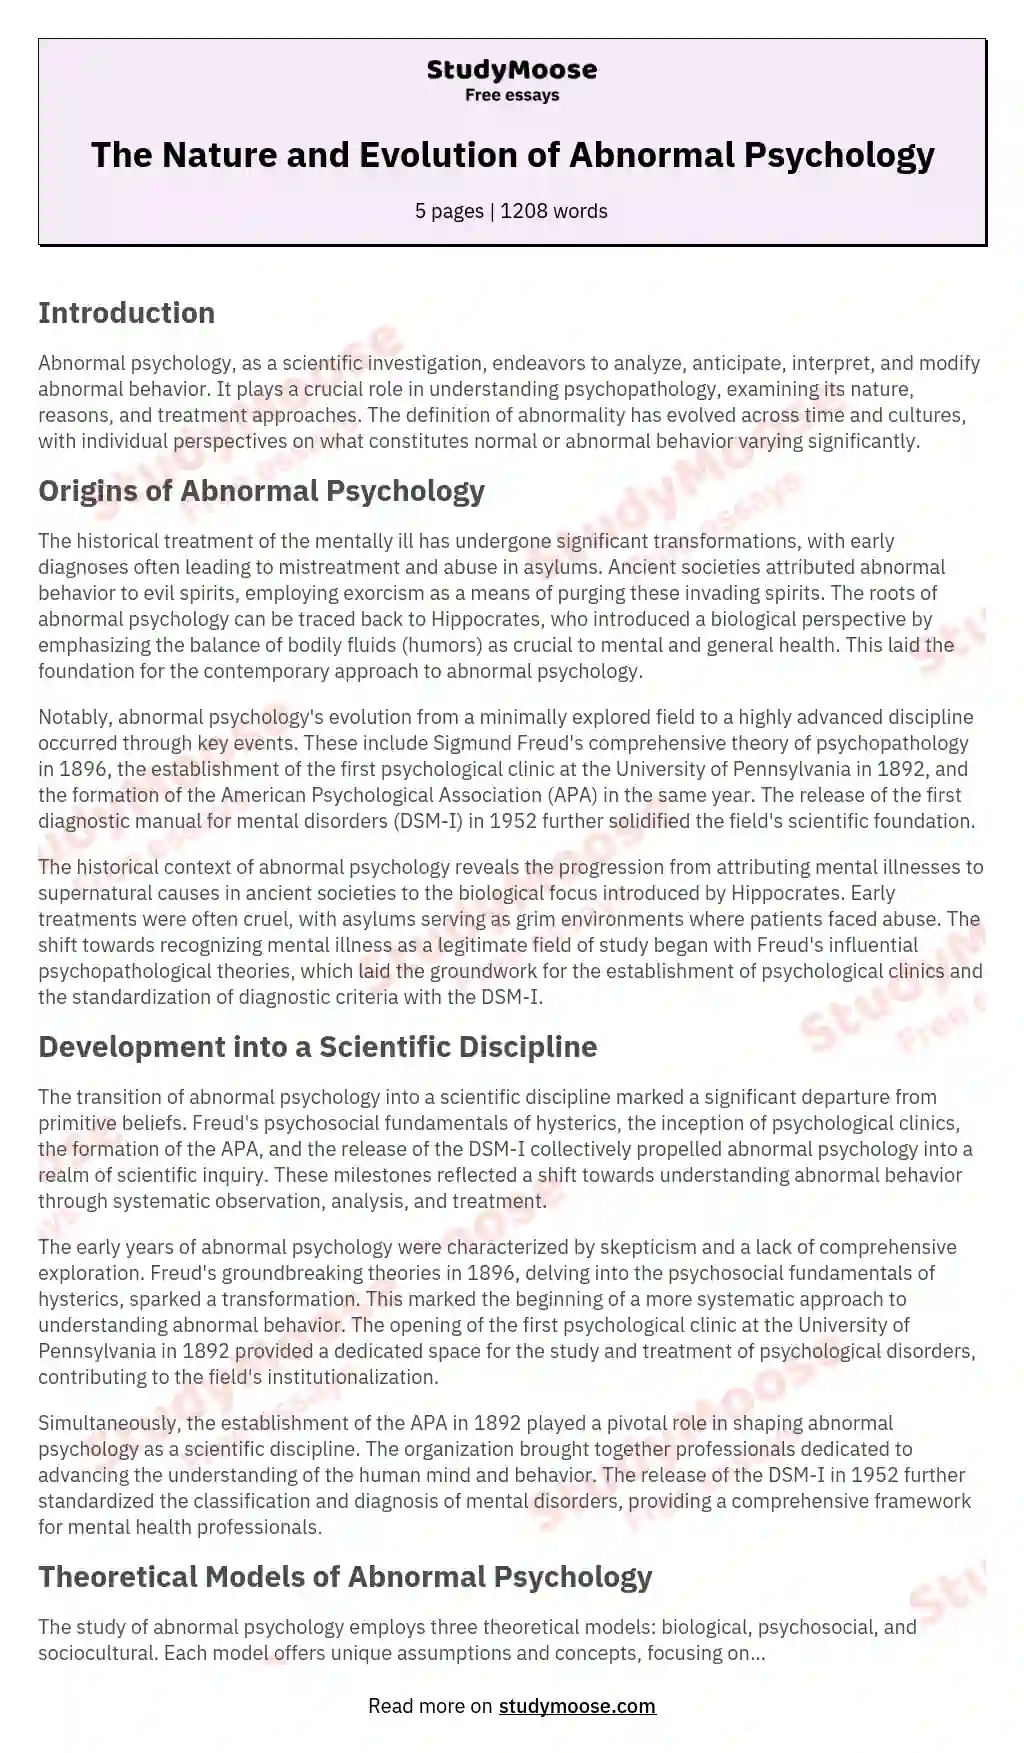 The Nature and Evolution of Abnormal Psychology essay